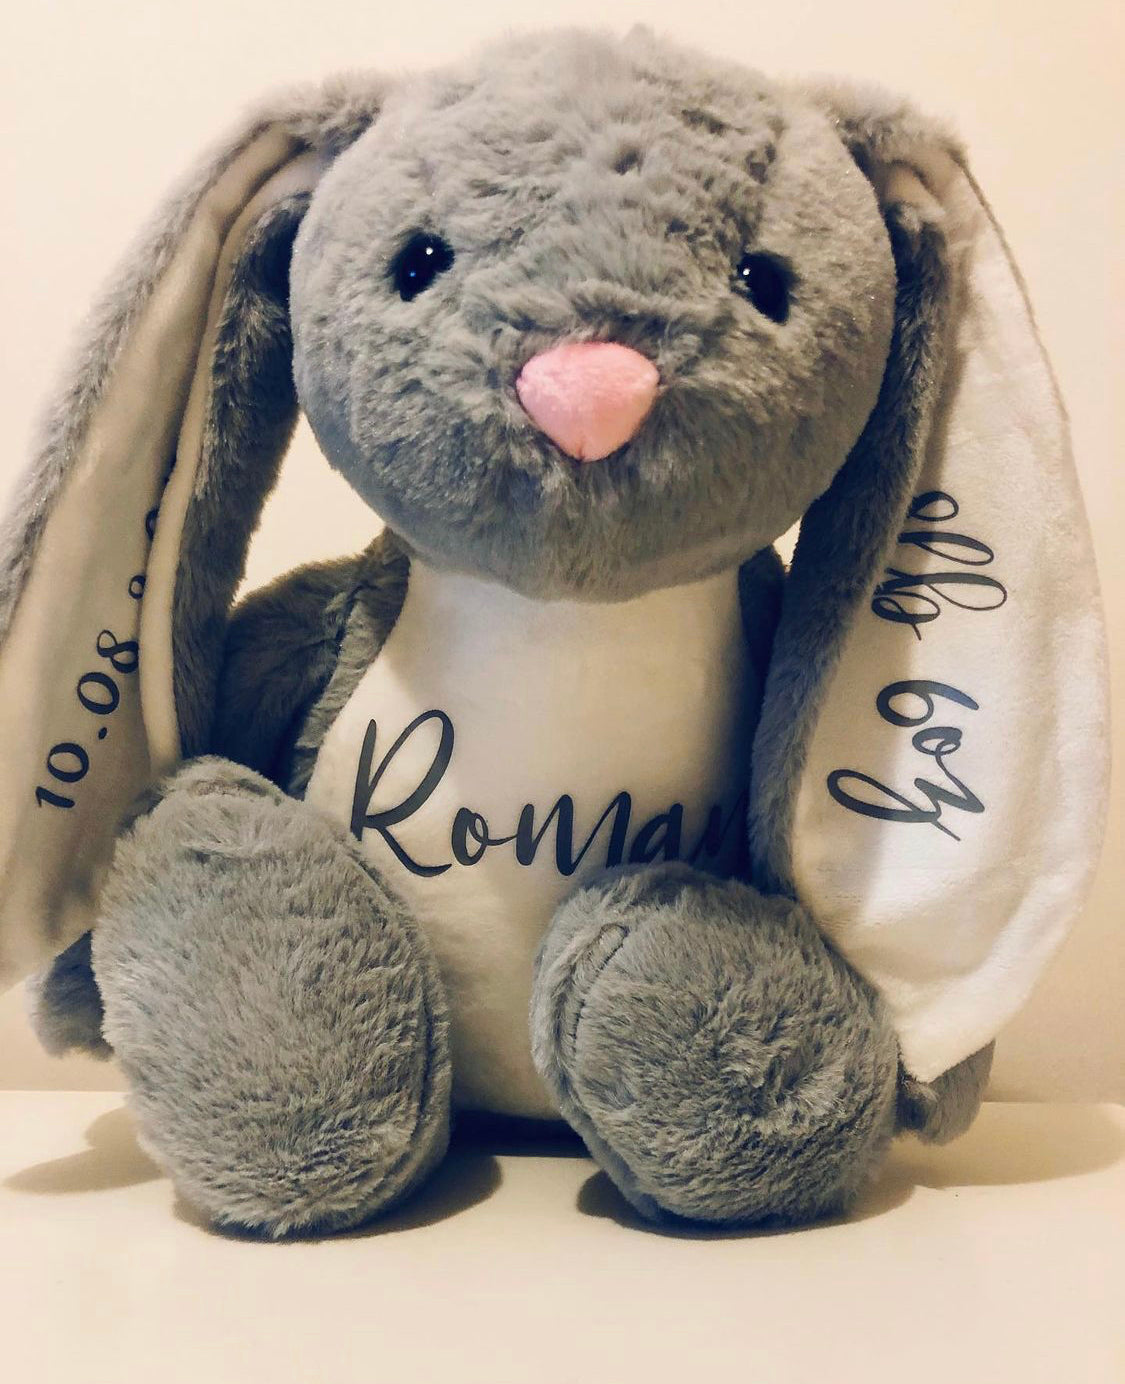 Personalised Soft Toys